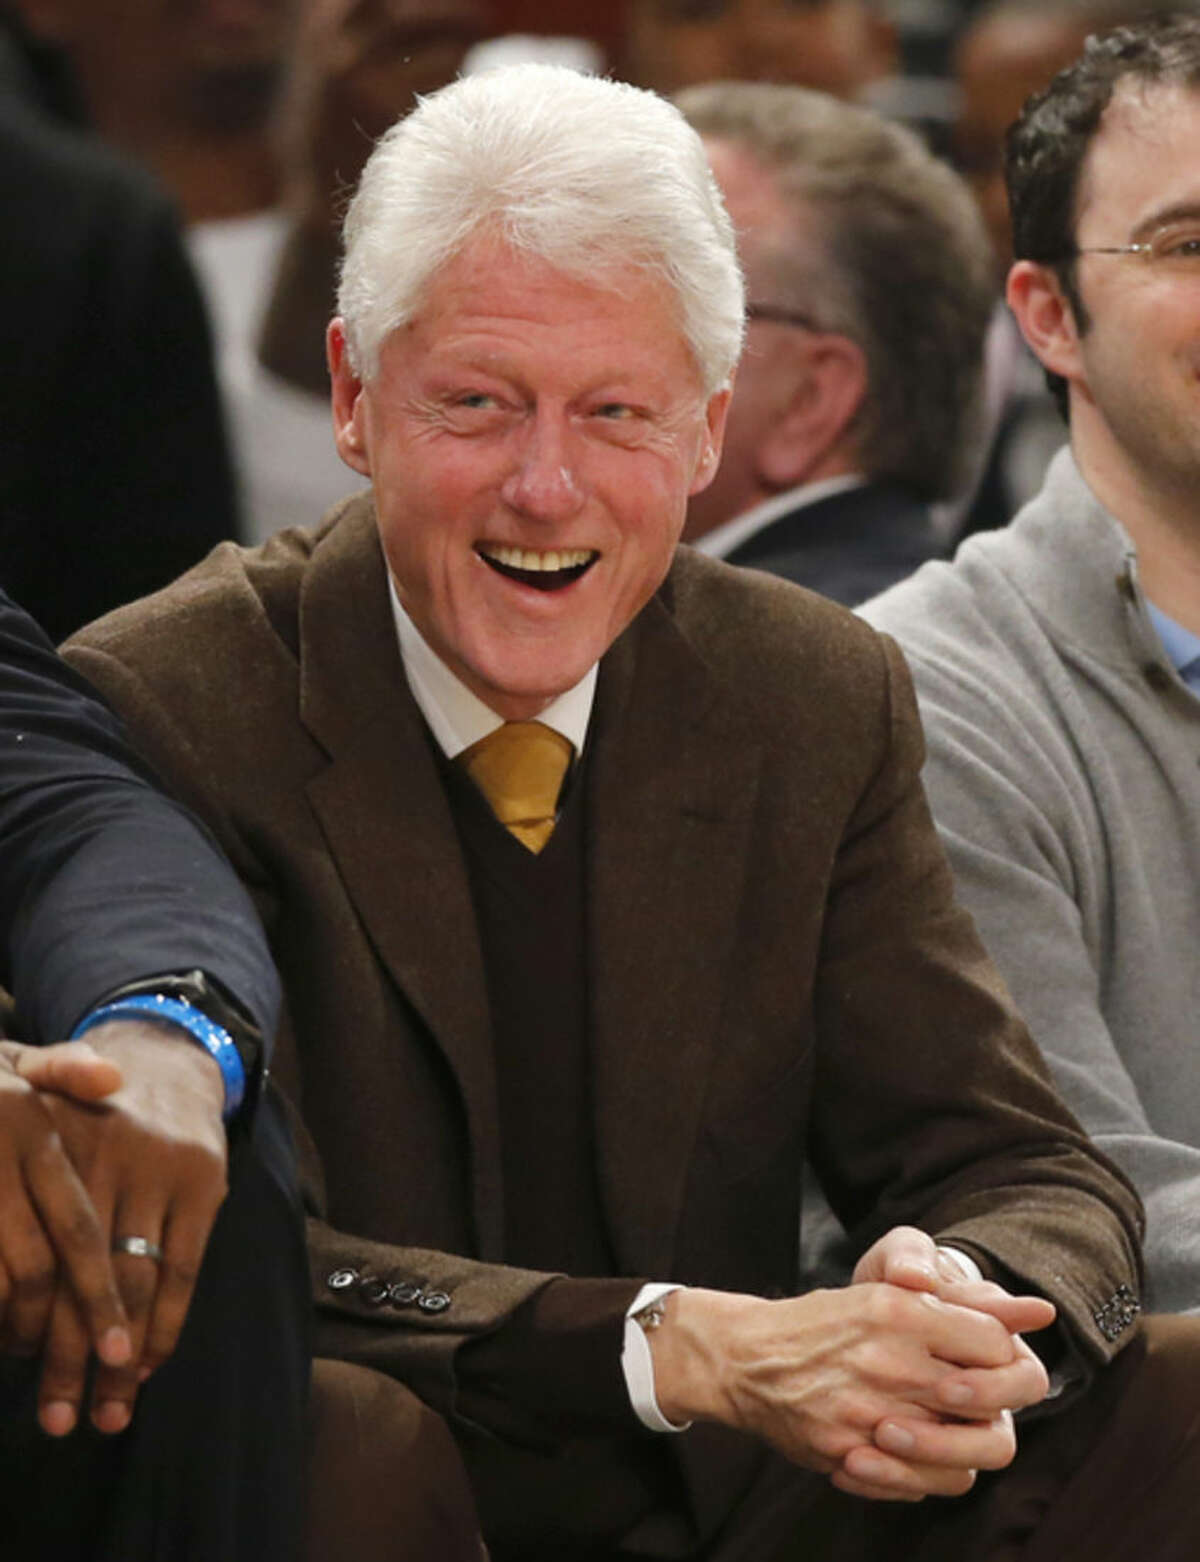 Former President Bill Clinton watches the first half of the NBA All-Star basketball game, Sunday, Feb. 15, 2015, in New York. (AP Photo/Kathy Willens)